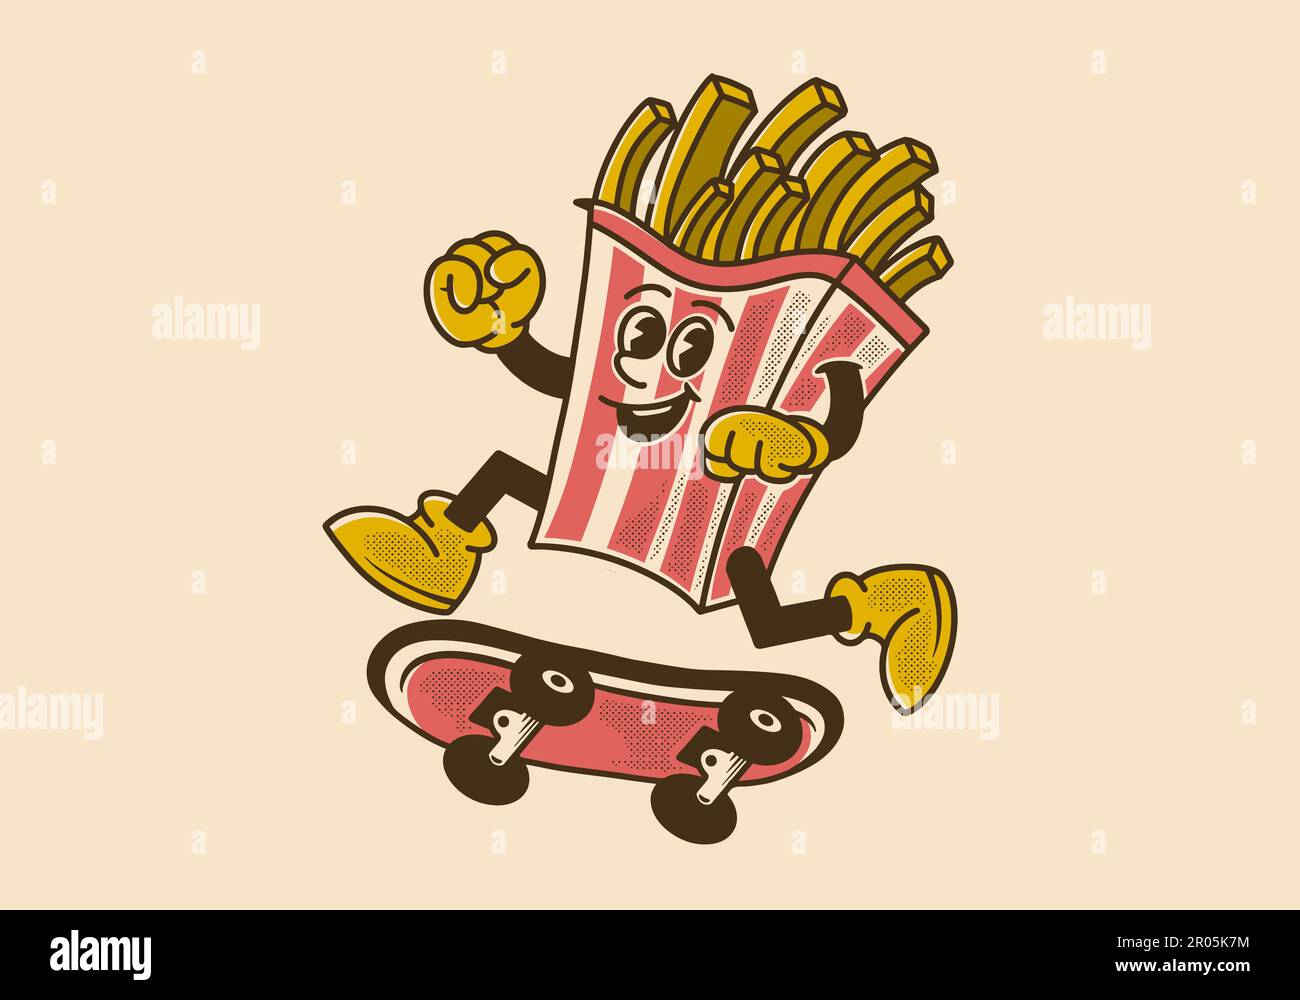 Vintage mascot character design of french fries jumping on skateboard Stock Vector